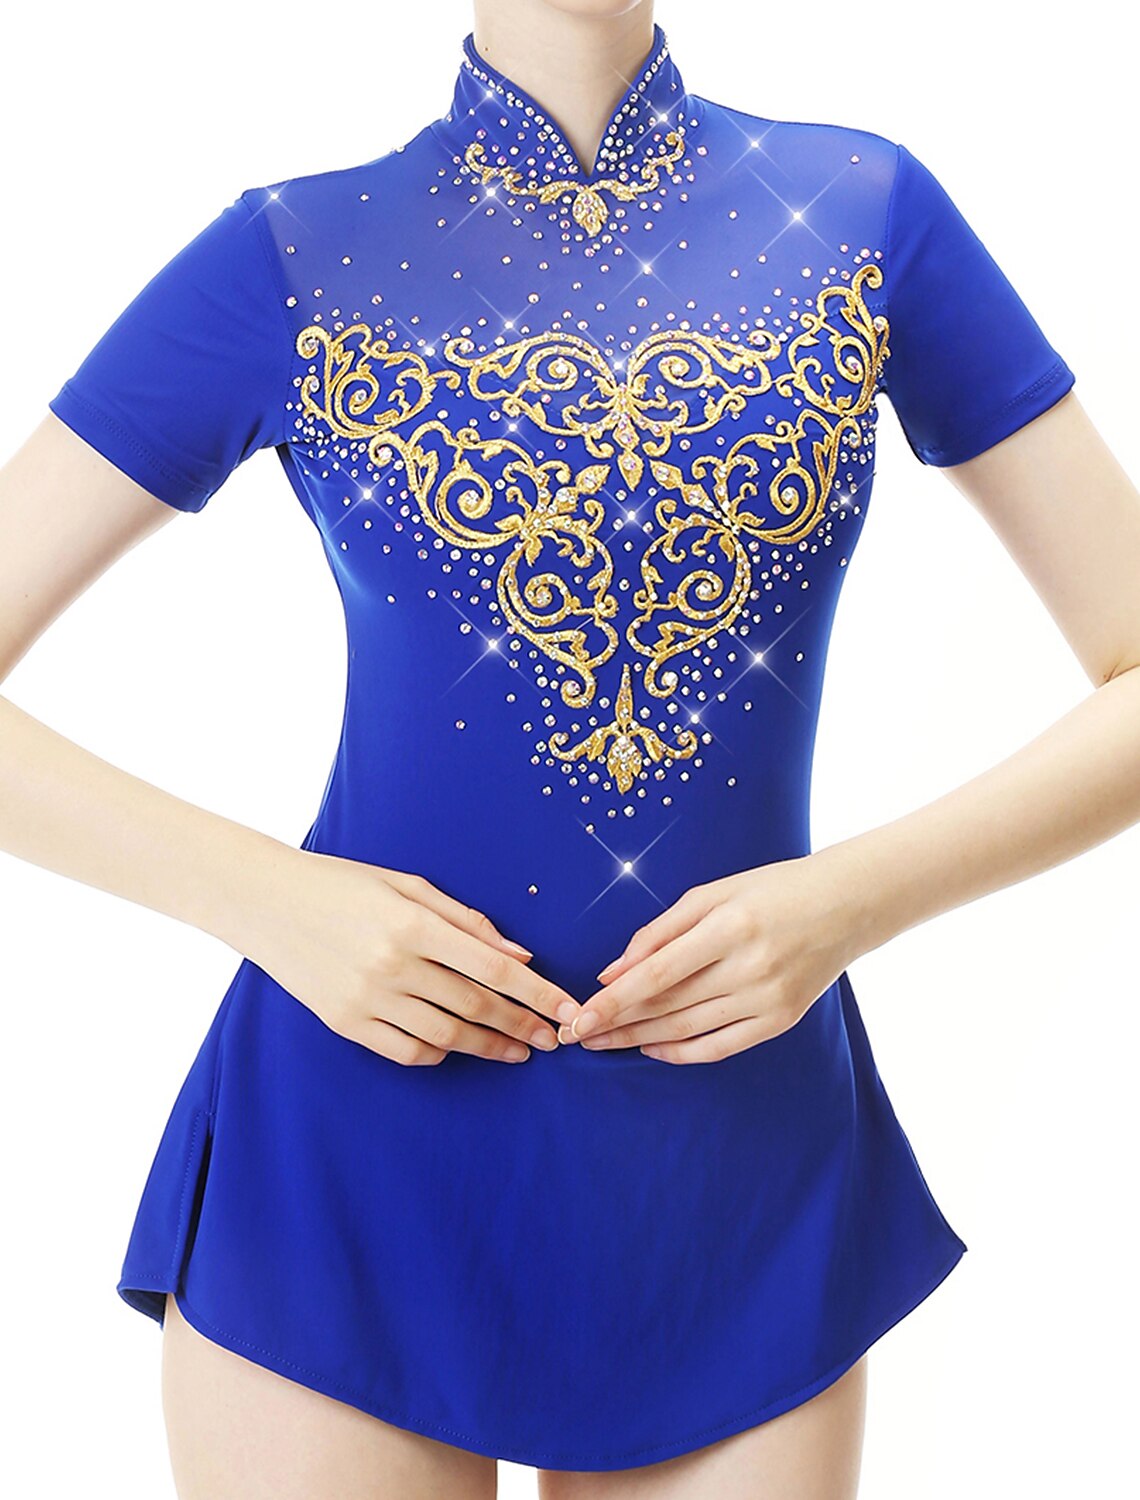 Ice skating dress Competition Figure Skating Classic Costume royal blue lace 